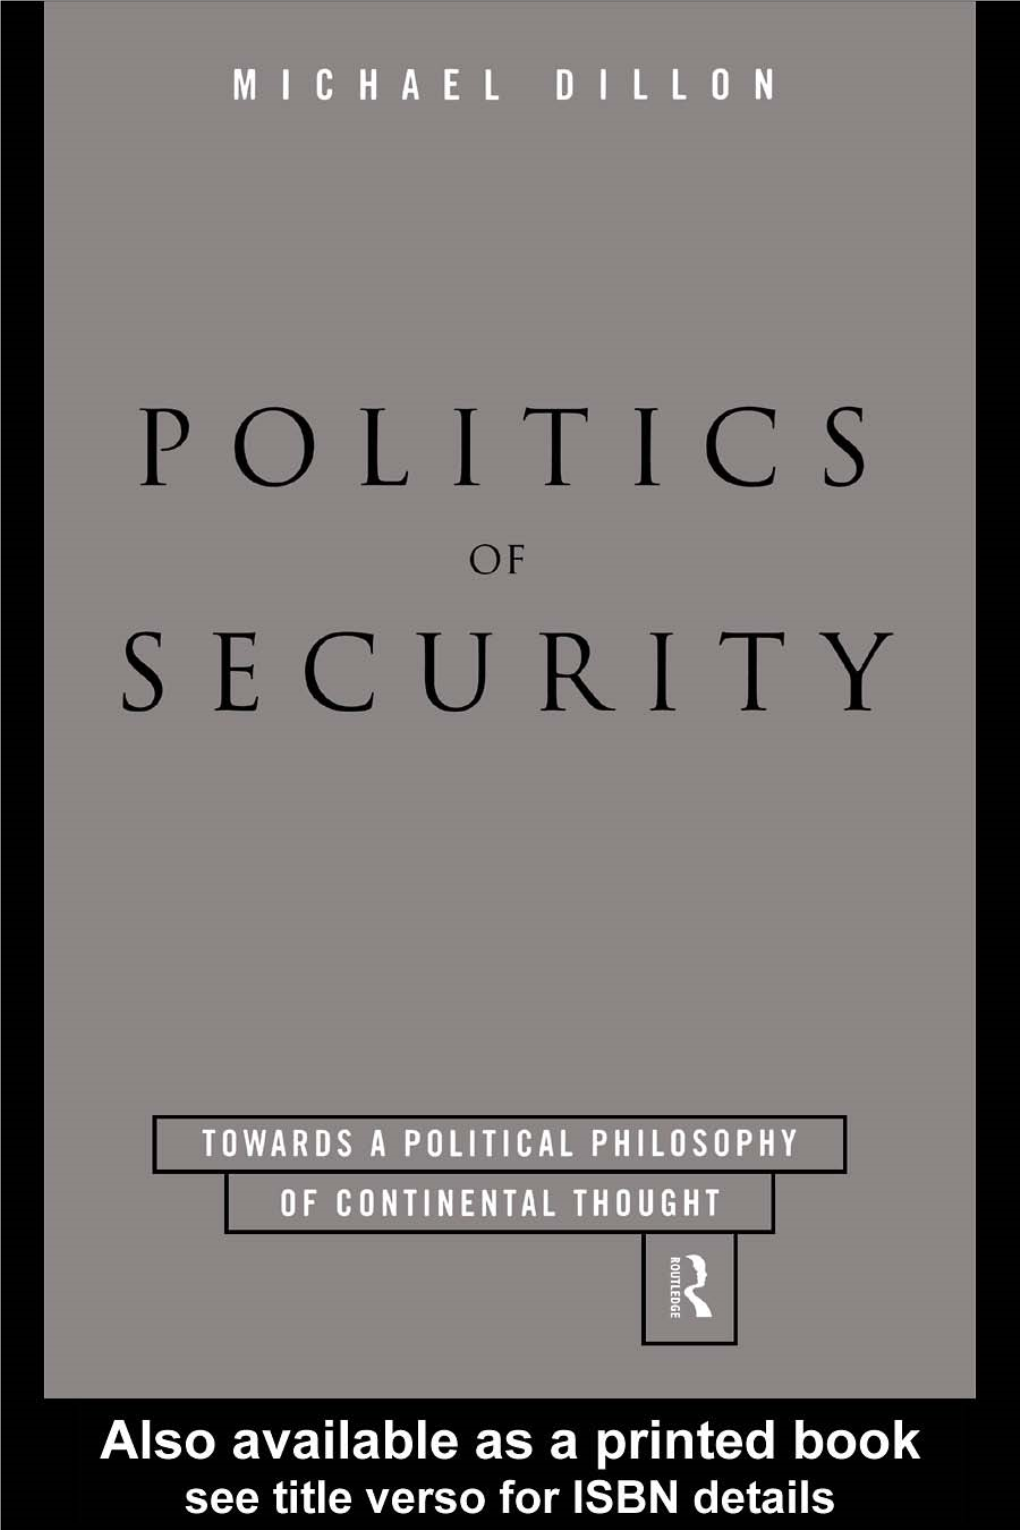 Politics of Security: Towards a Political Philosophy of Continental Thought/Michael Dillon